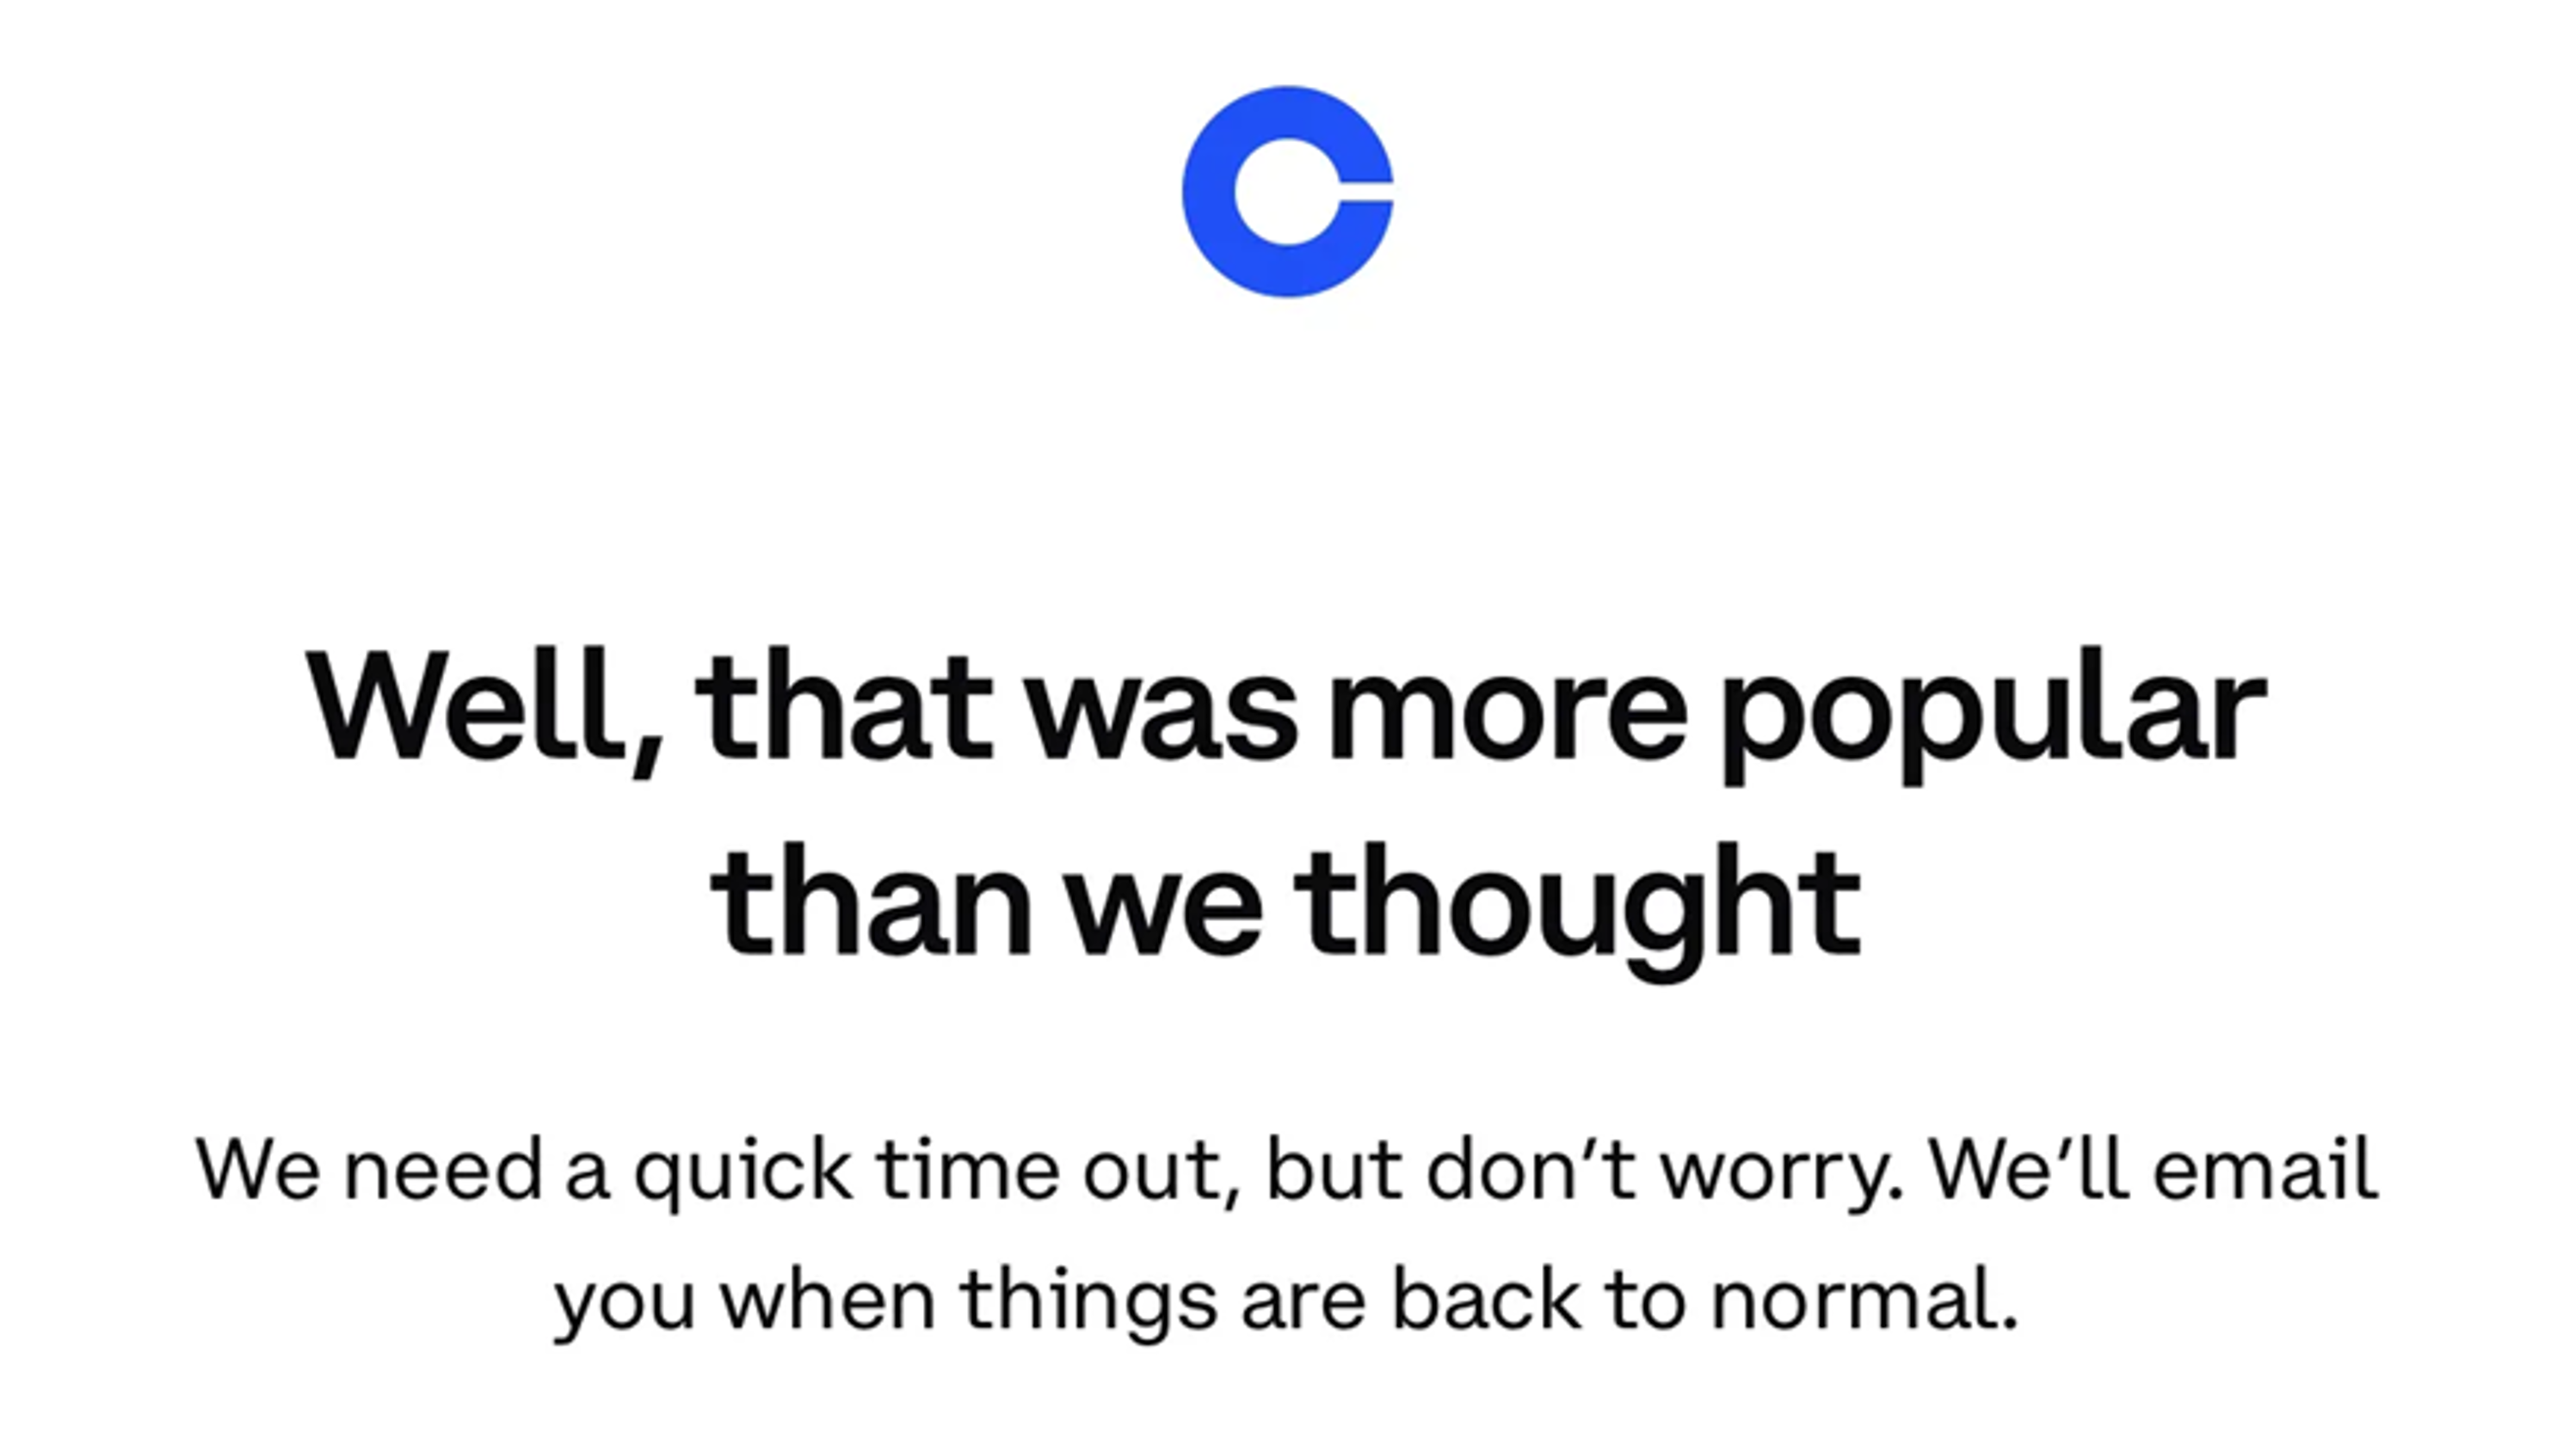 Coinbase crash page "well, that was more popular than we thought"